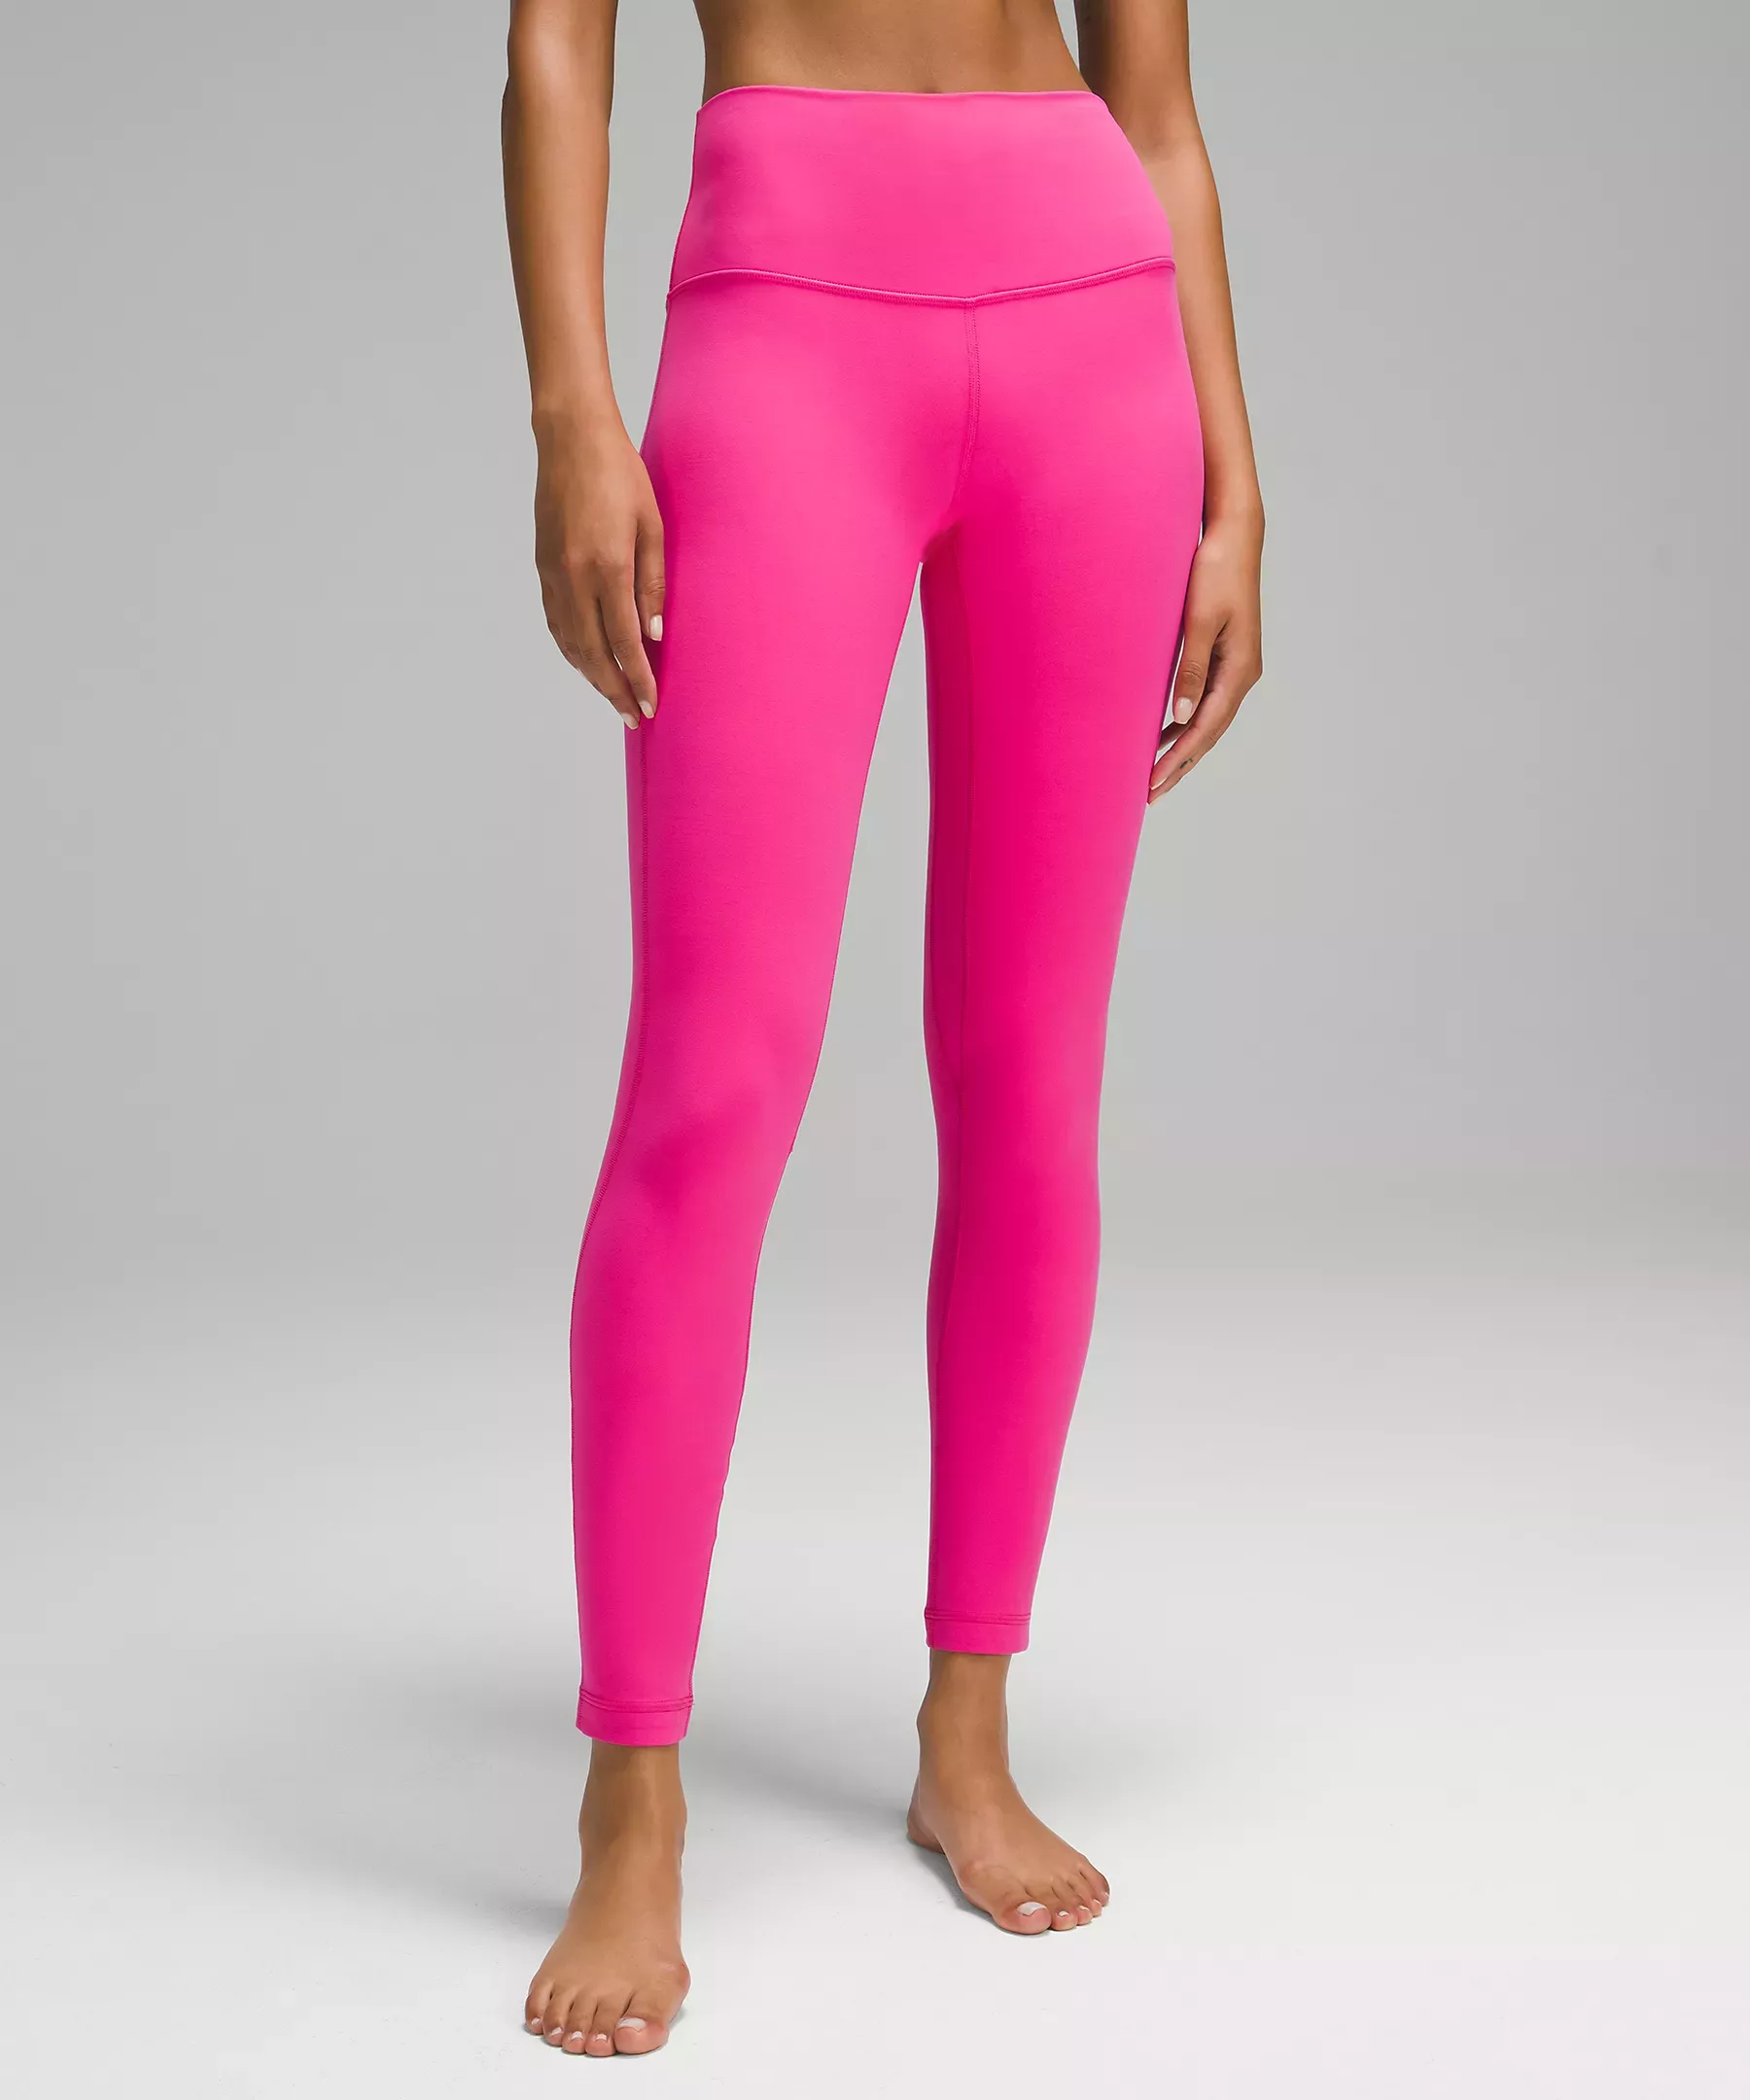 LEGGING REVIEW: lululemon aligns in sonic pink #fypage #fittok